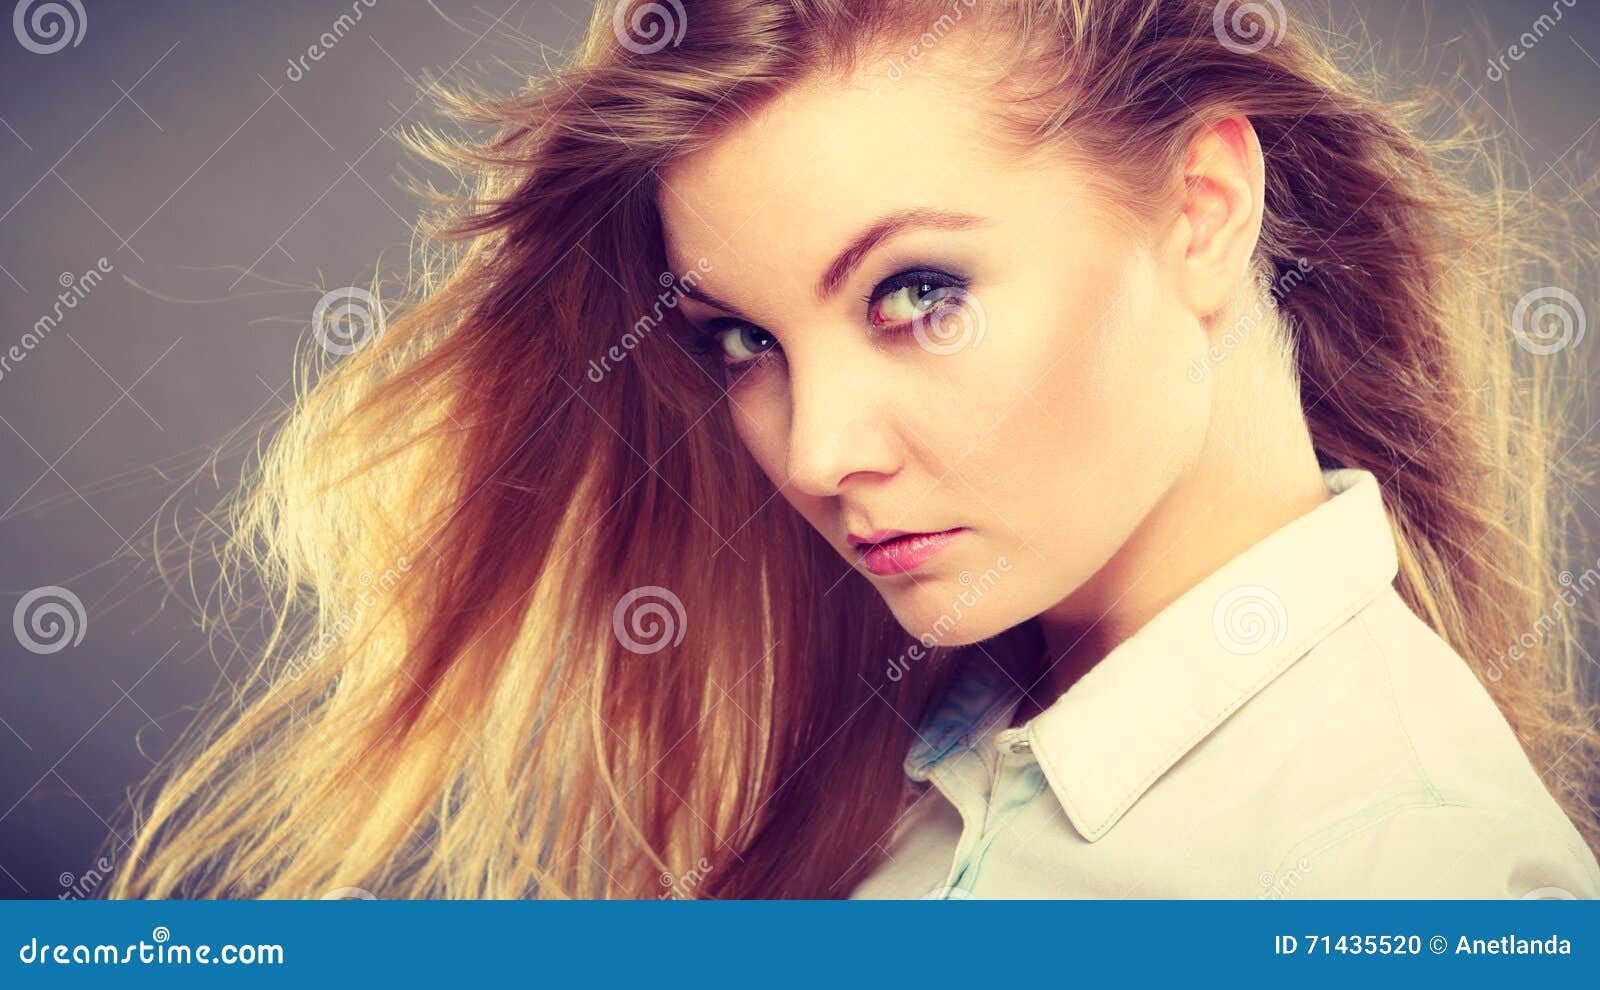 Blonde girl with wavy hair waving at the camera - wide 5